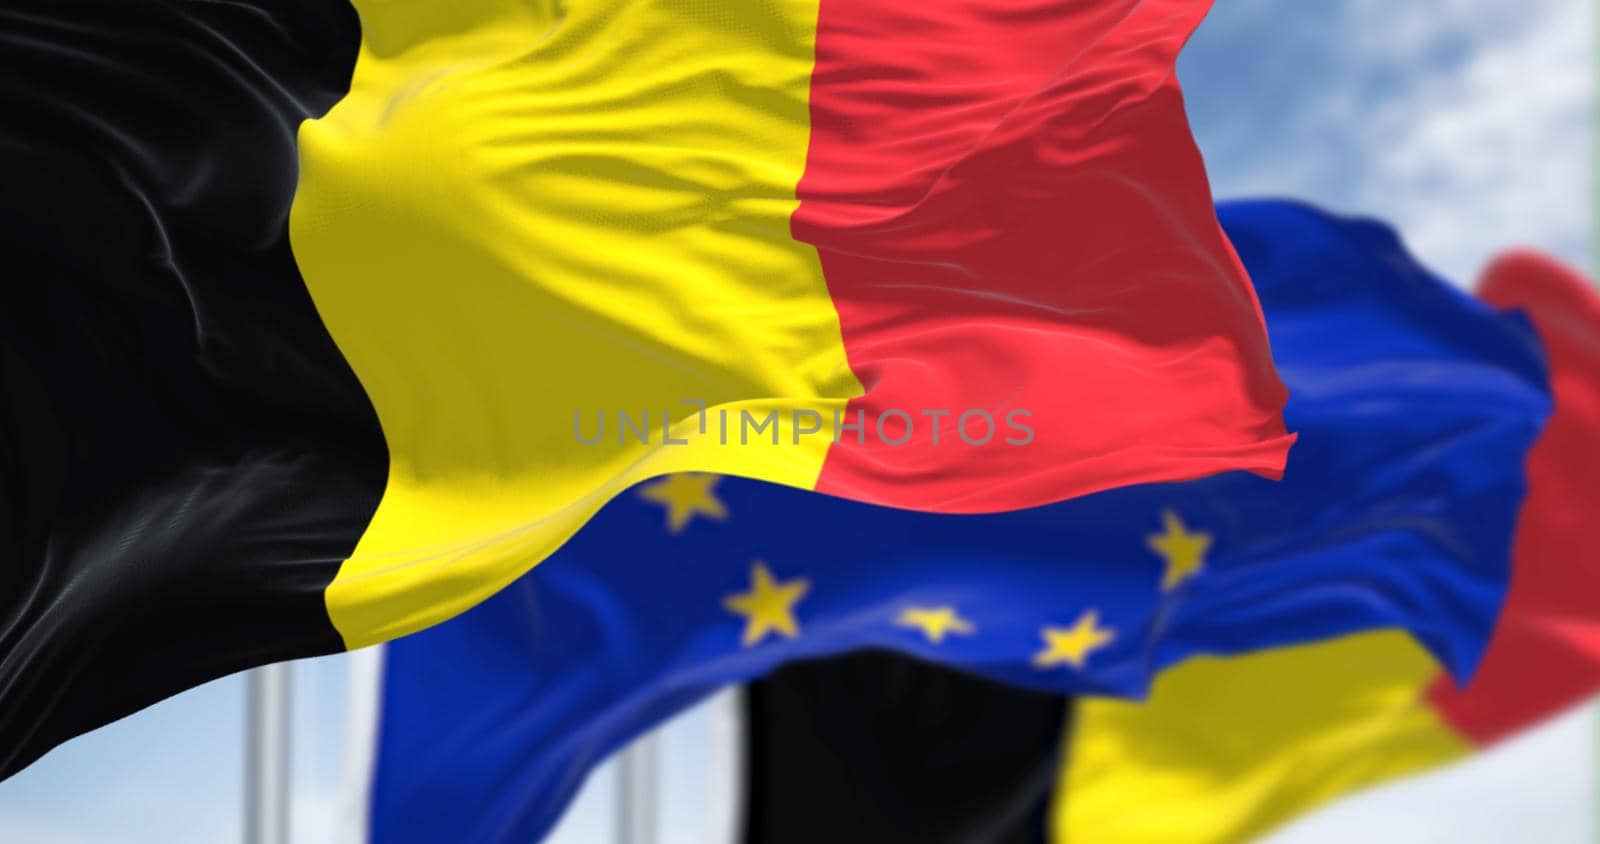 Detail of the national flag of Belgium waving in the wind with blurred european union flag in the background on a clear day. Democracy and politics. European country. Selective focus.